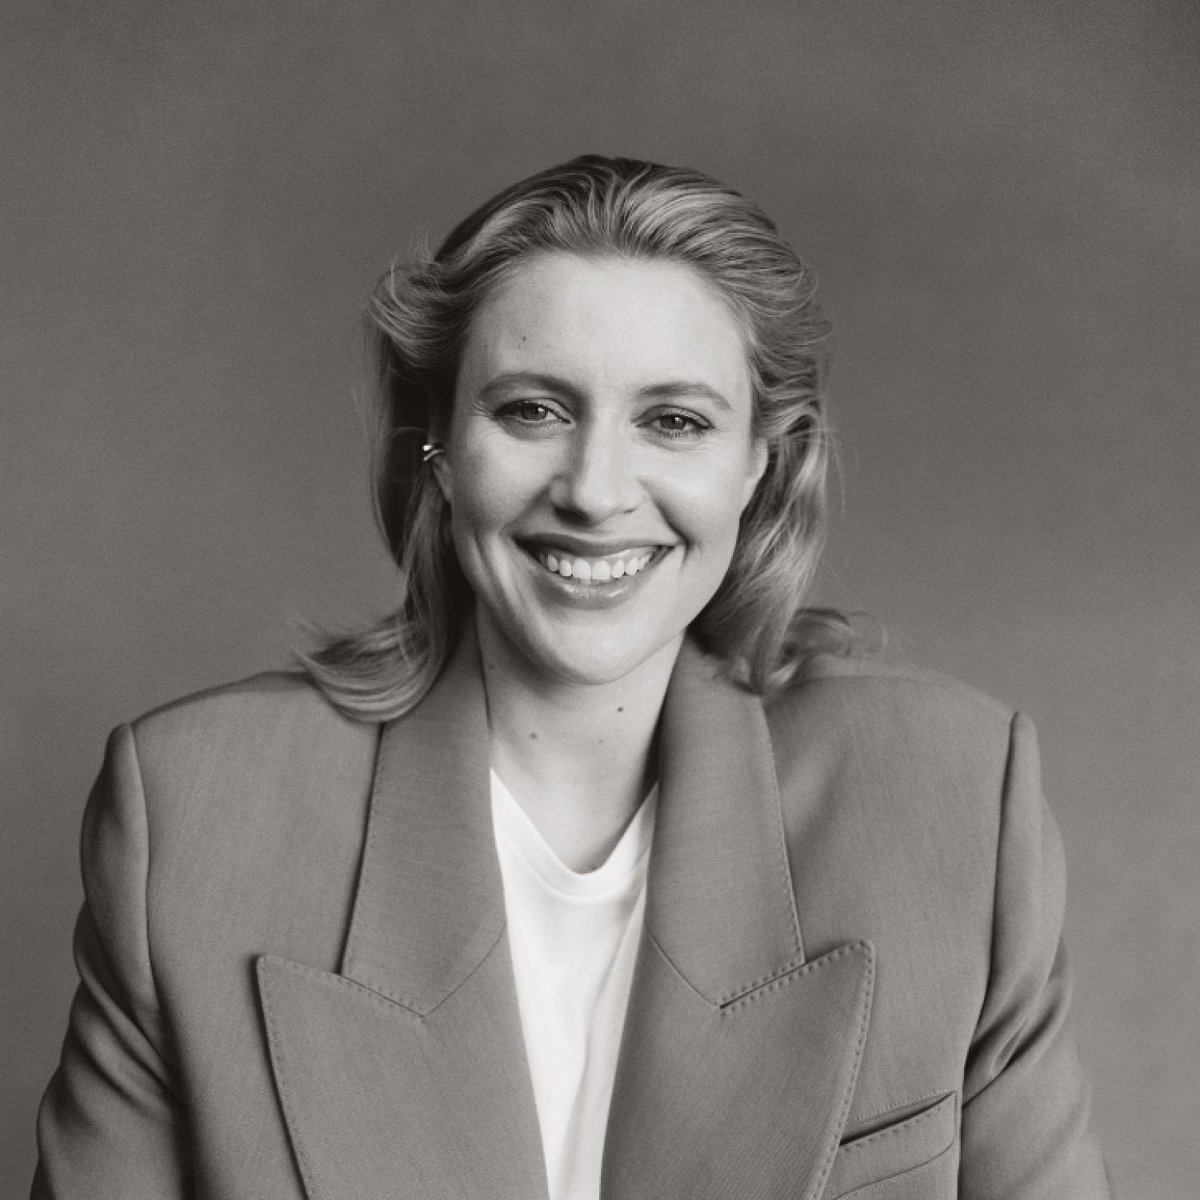 Greta Gerwig has joined the cast of Noah Baumbach’s next film alongside George Clooney, Adam Sandler, Laura Dern, Riley Keough and Billy Crudup.

Described as a funny and emotional coming-of-age film about adults.